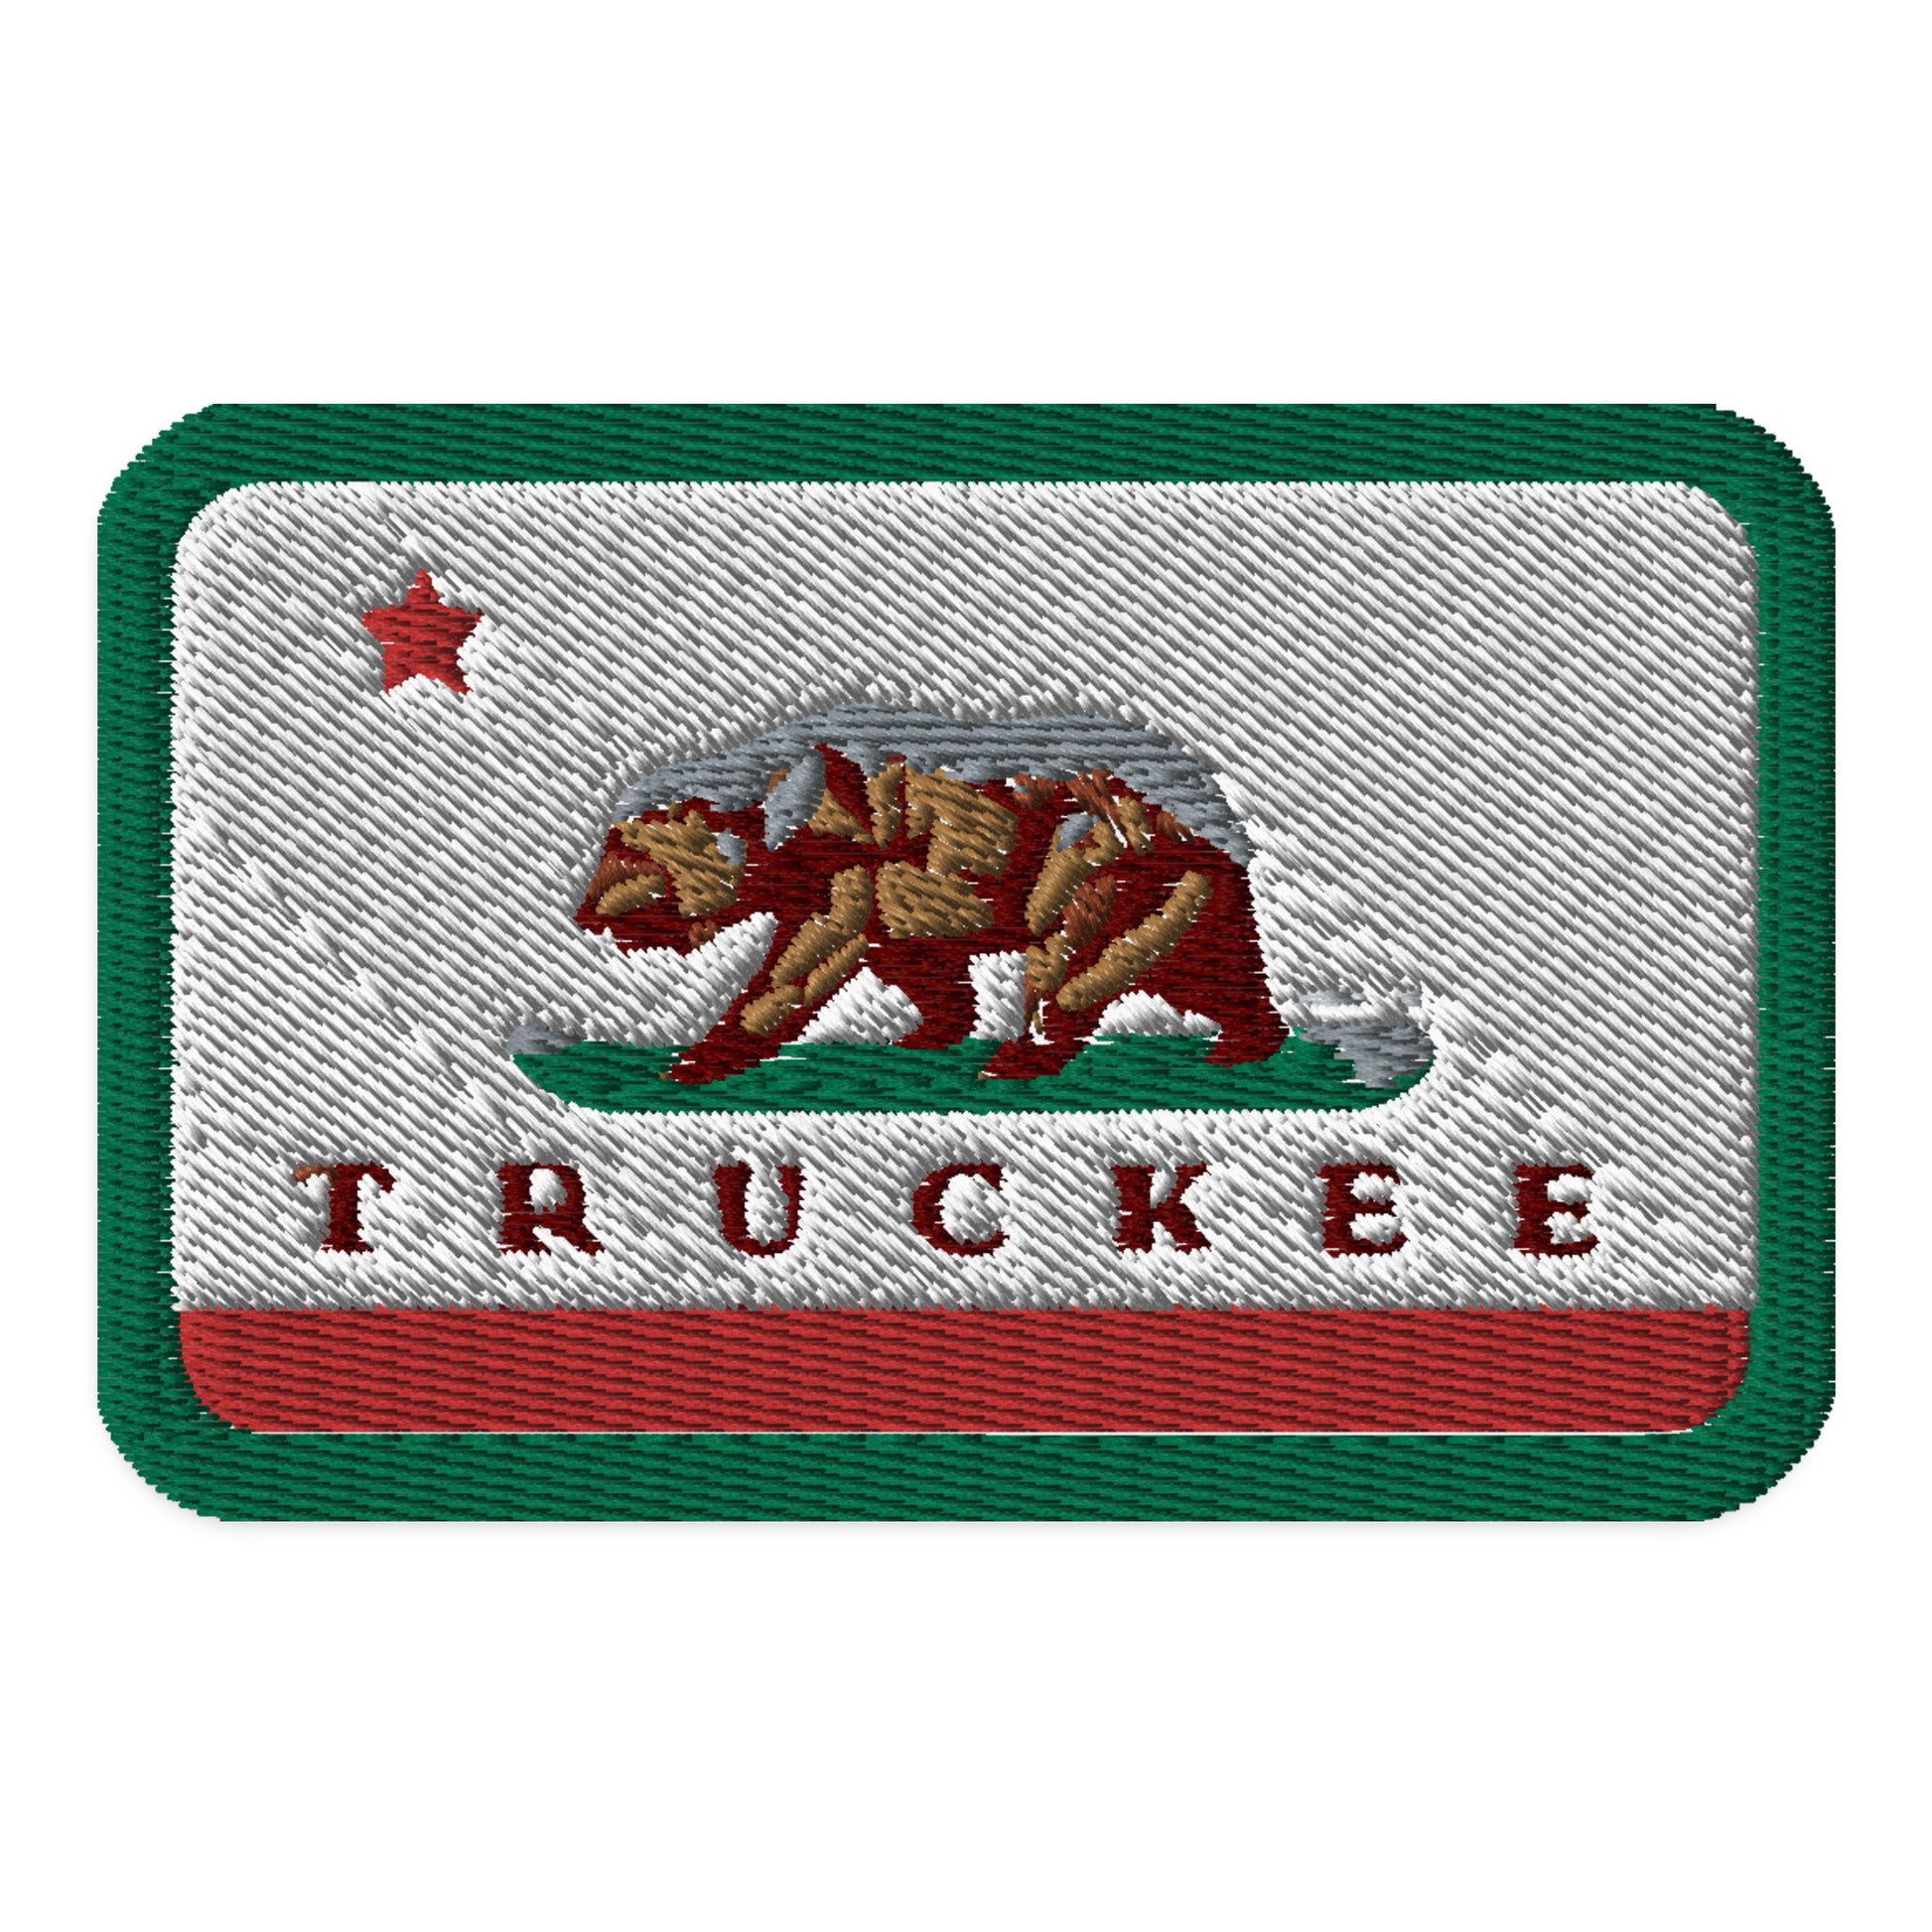 Truckee patch